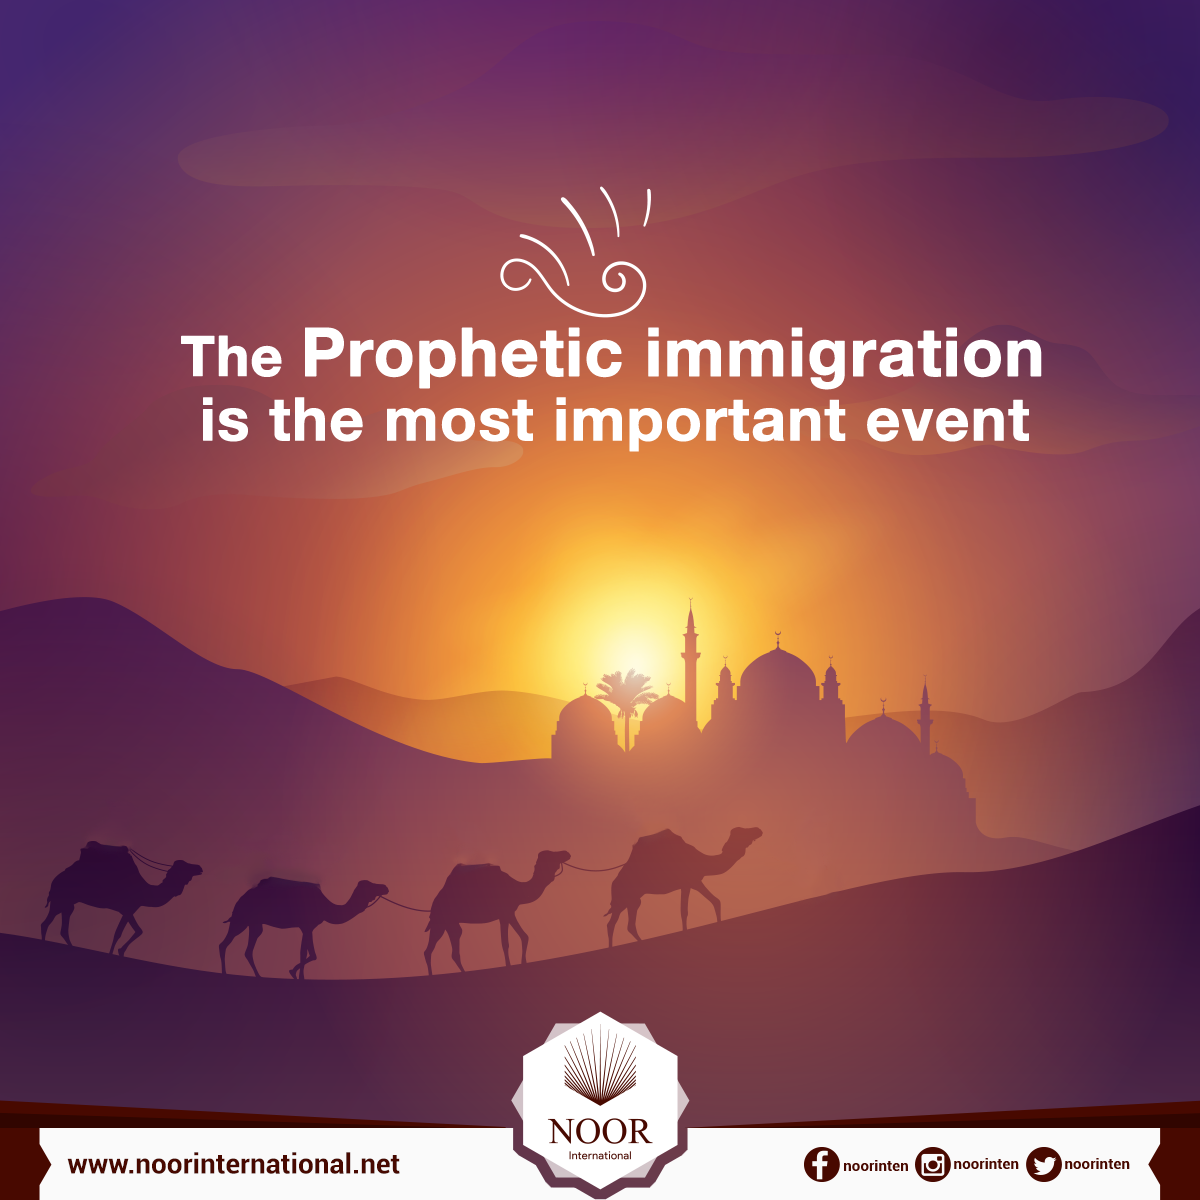 The Prophetic immigration is the most important event